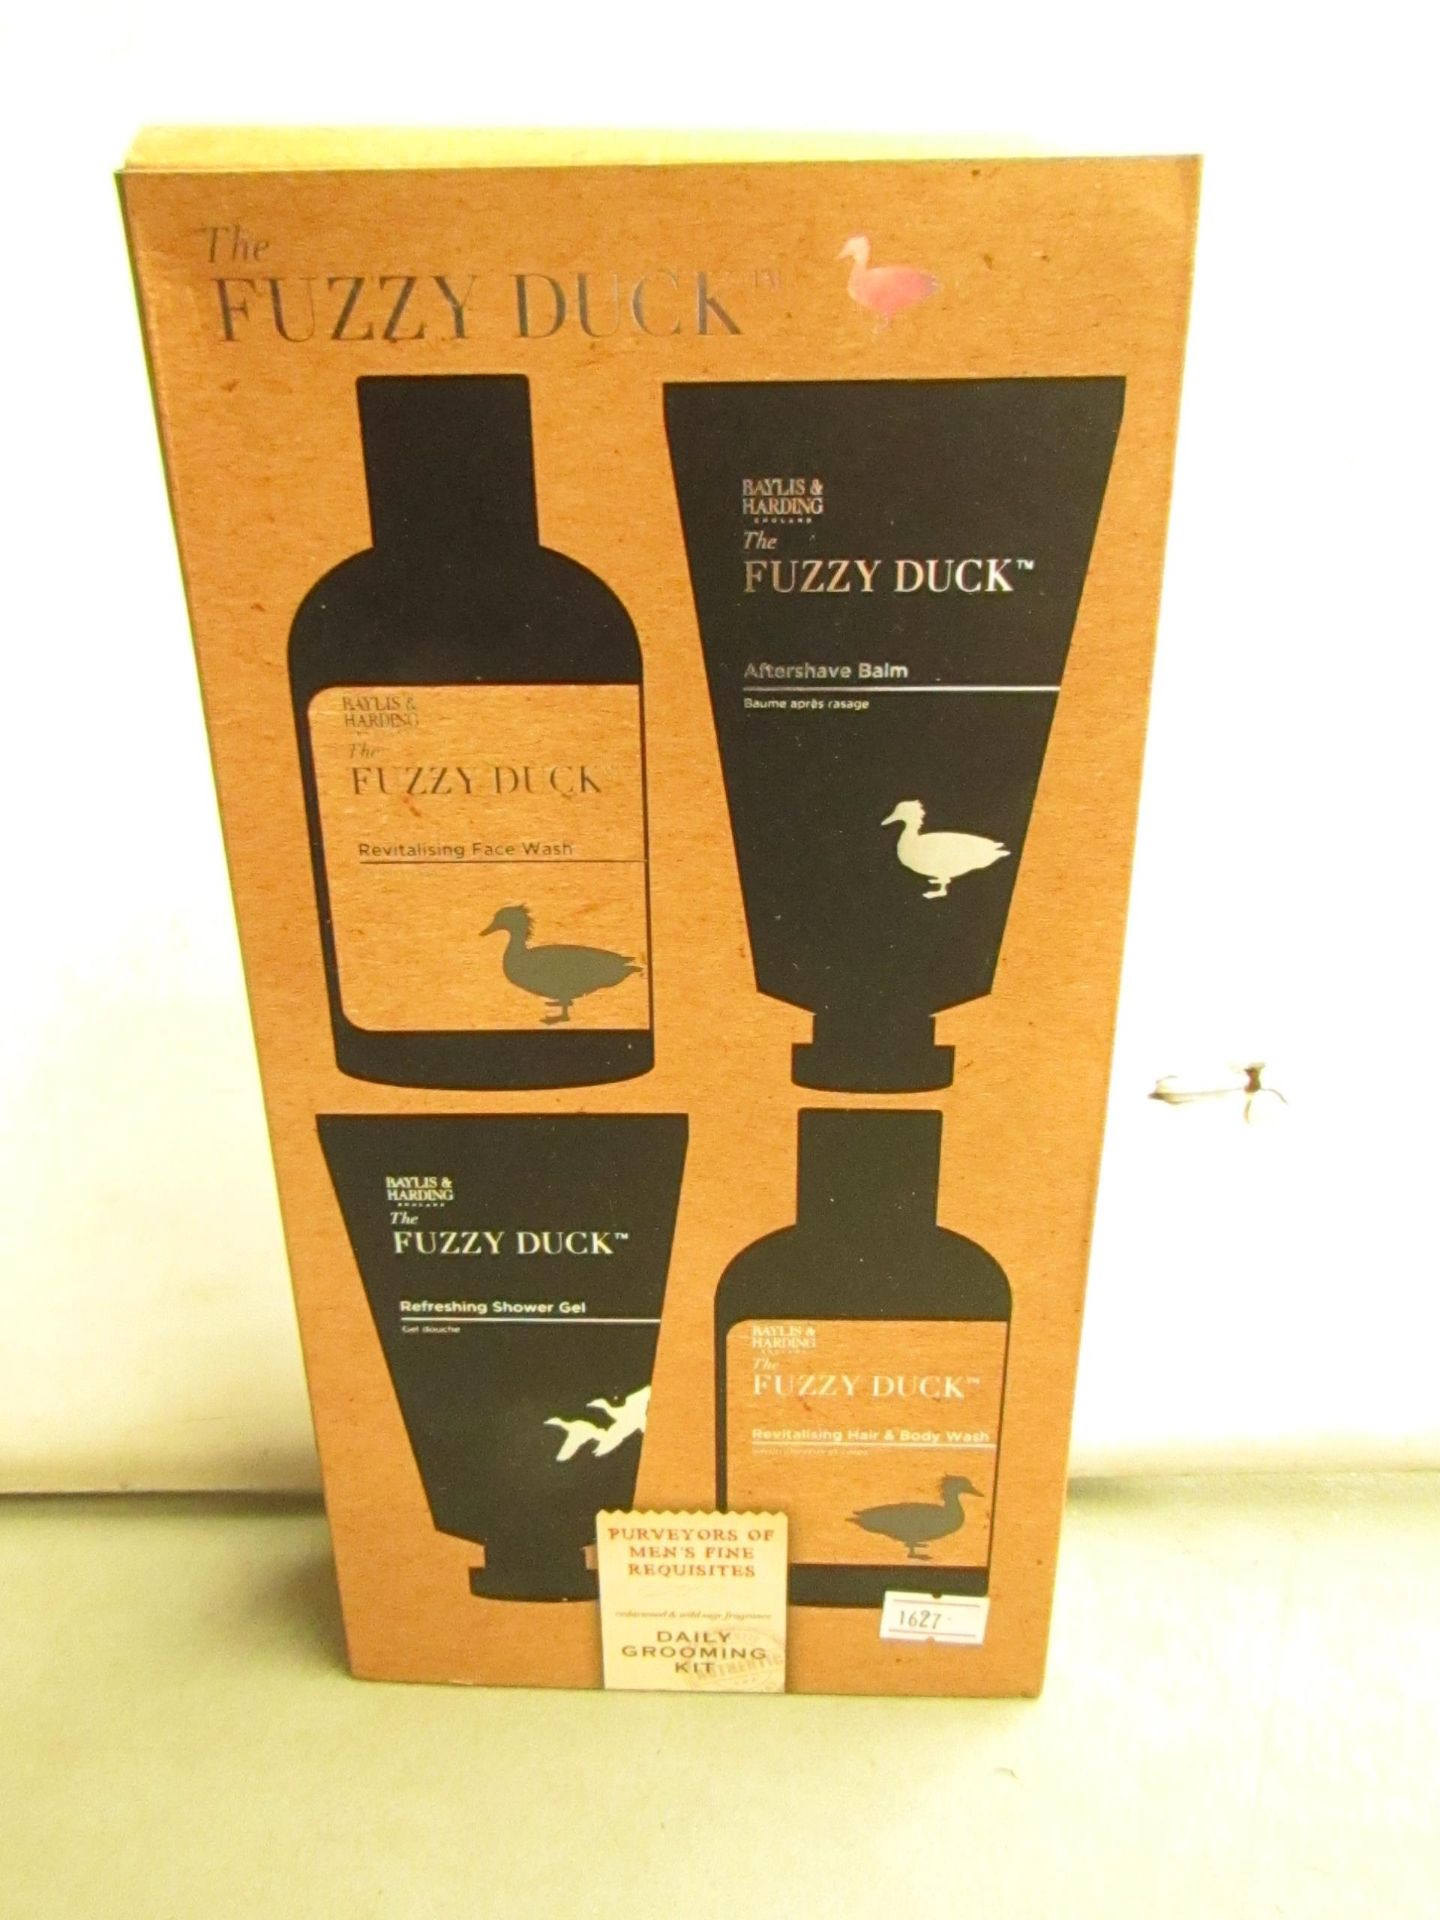 The Fuzzy Duck Daily Grooming Kit. Incl face wash, Biody Wash, Shampoo & Aftershave Barm. New &